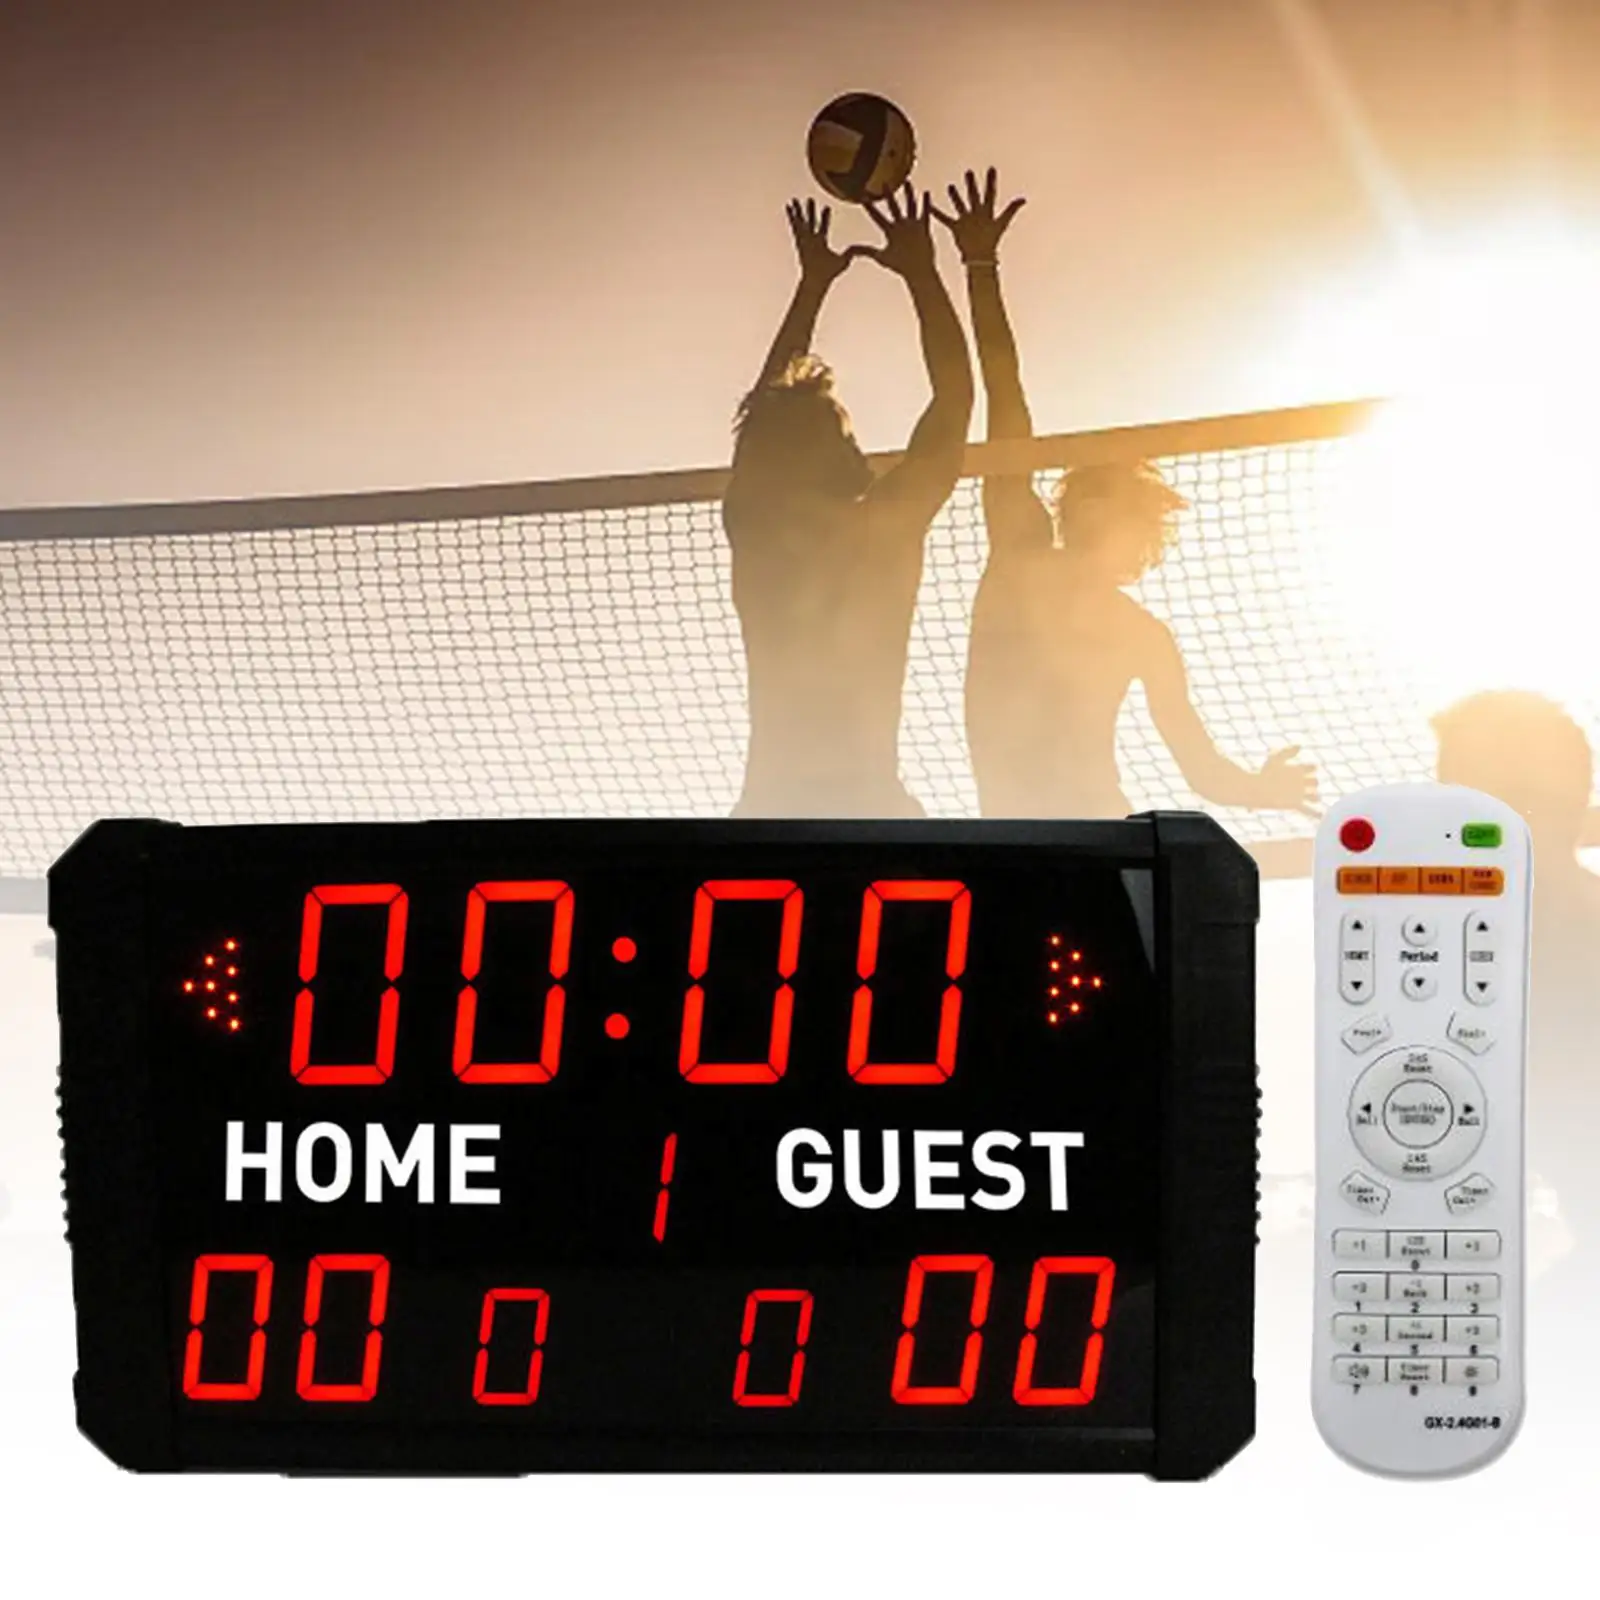 LED Scoreboard with Remote Control Plug Type US Suitable for Most Games